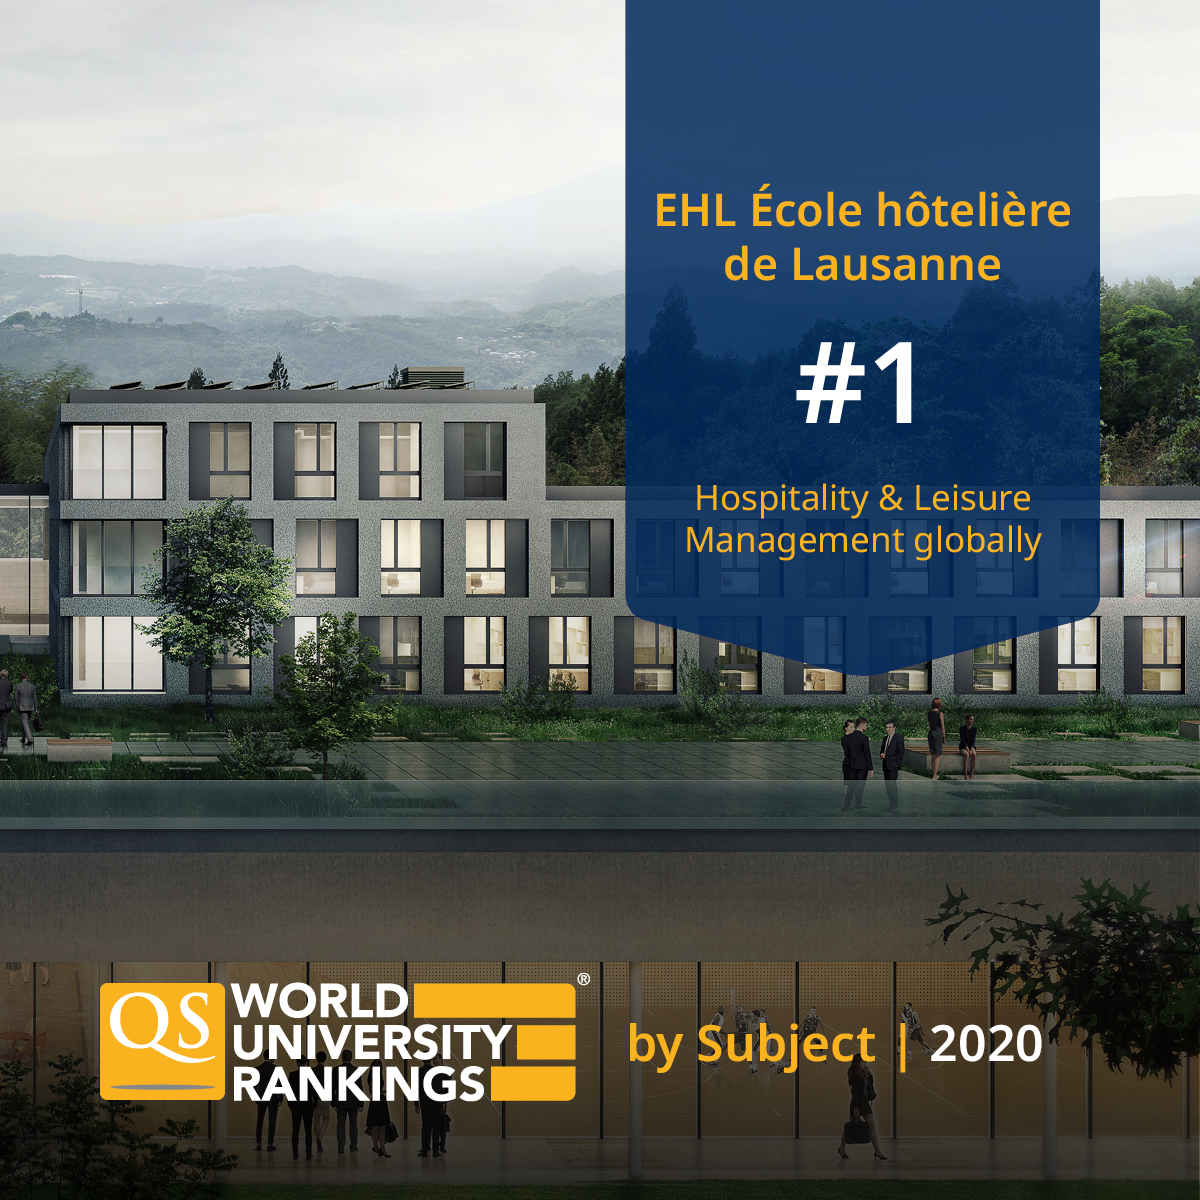 EHL named best hospitality & leisure management school in the world